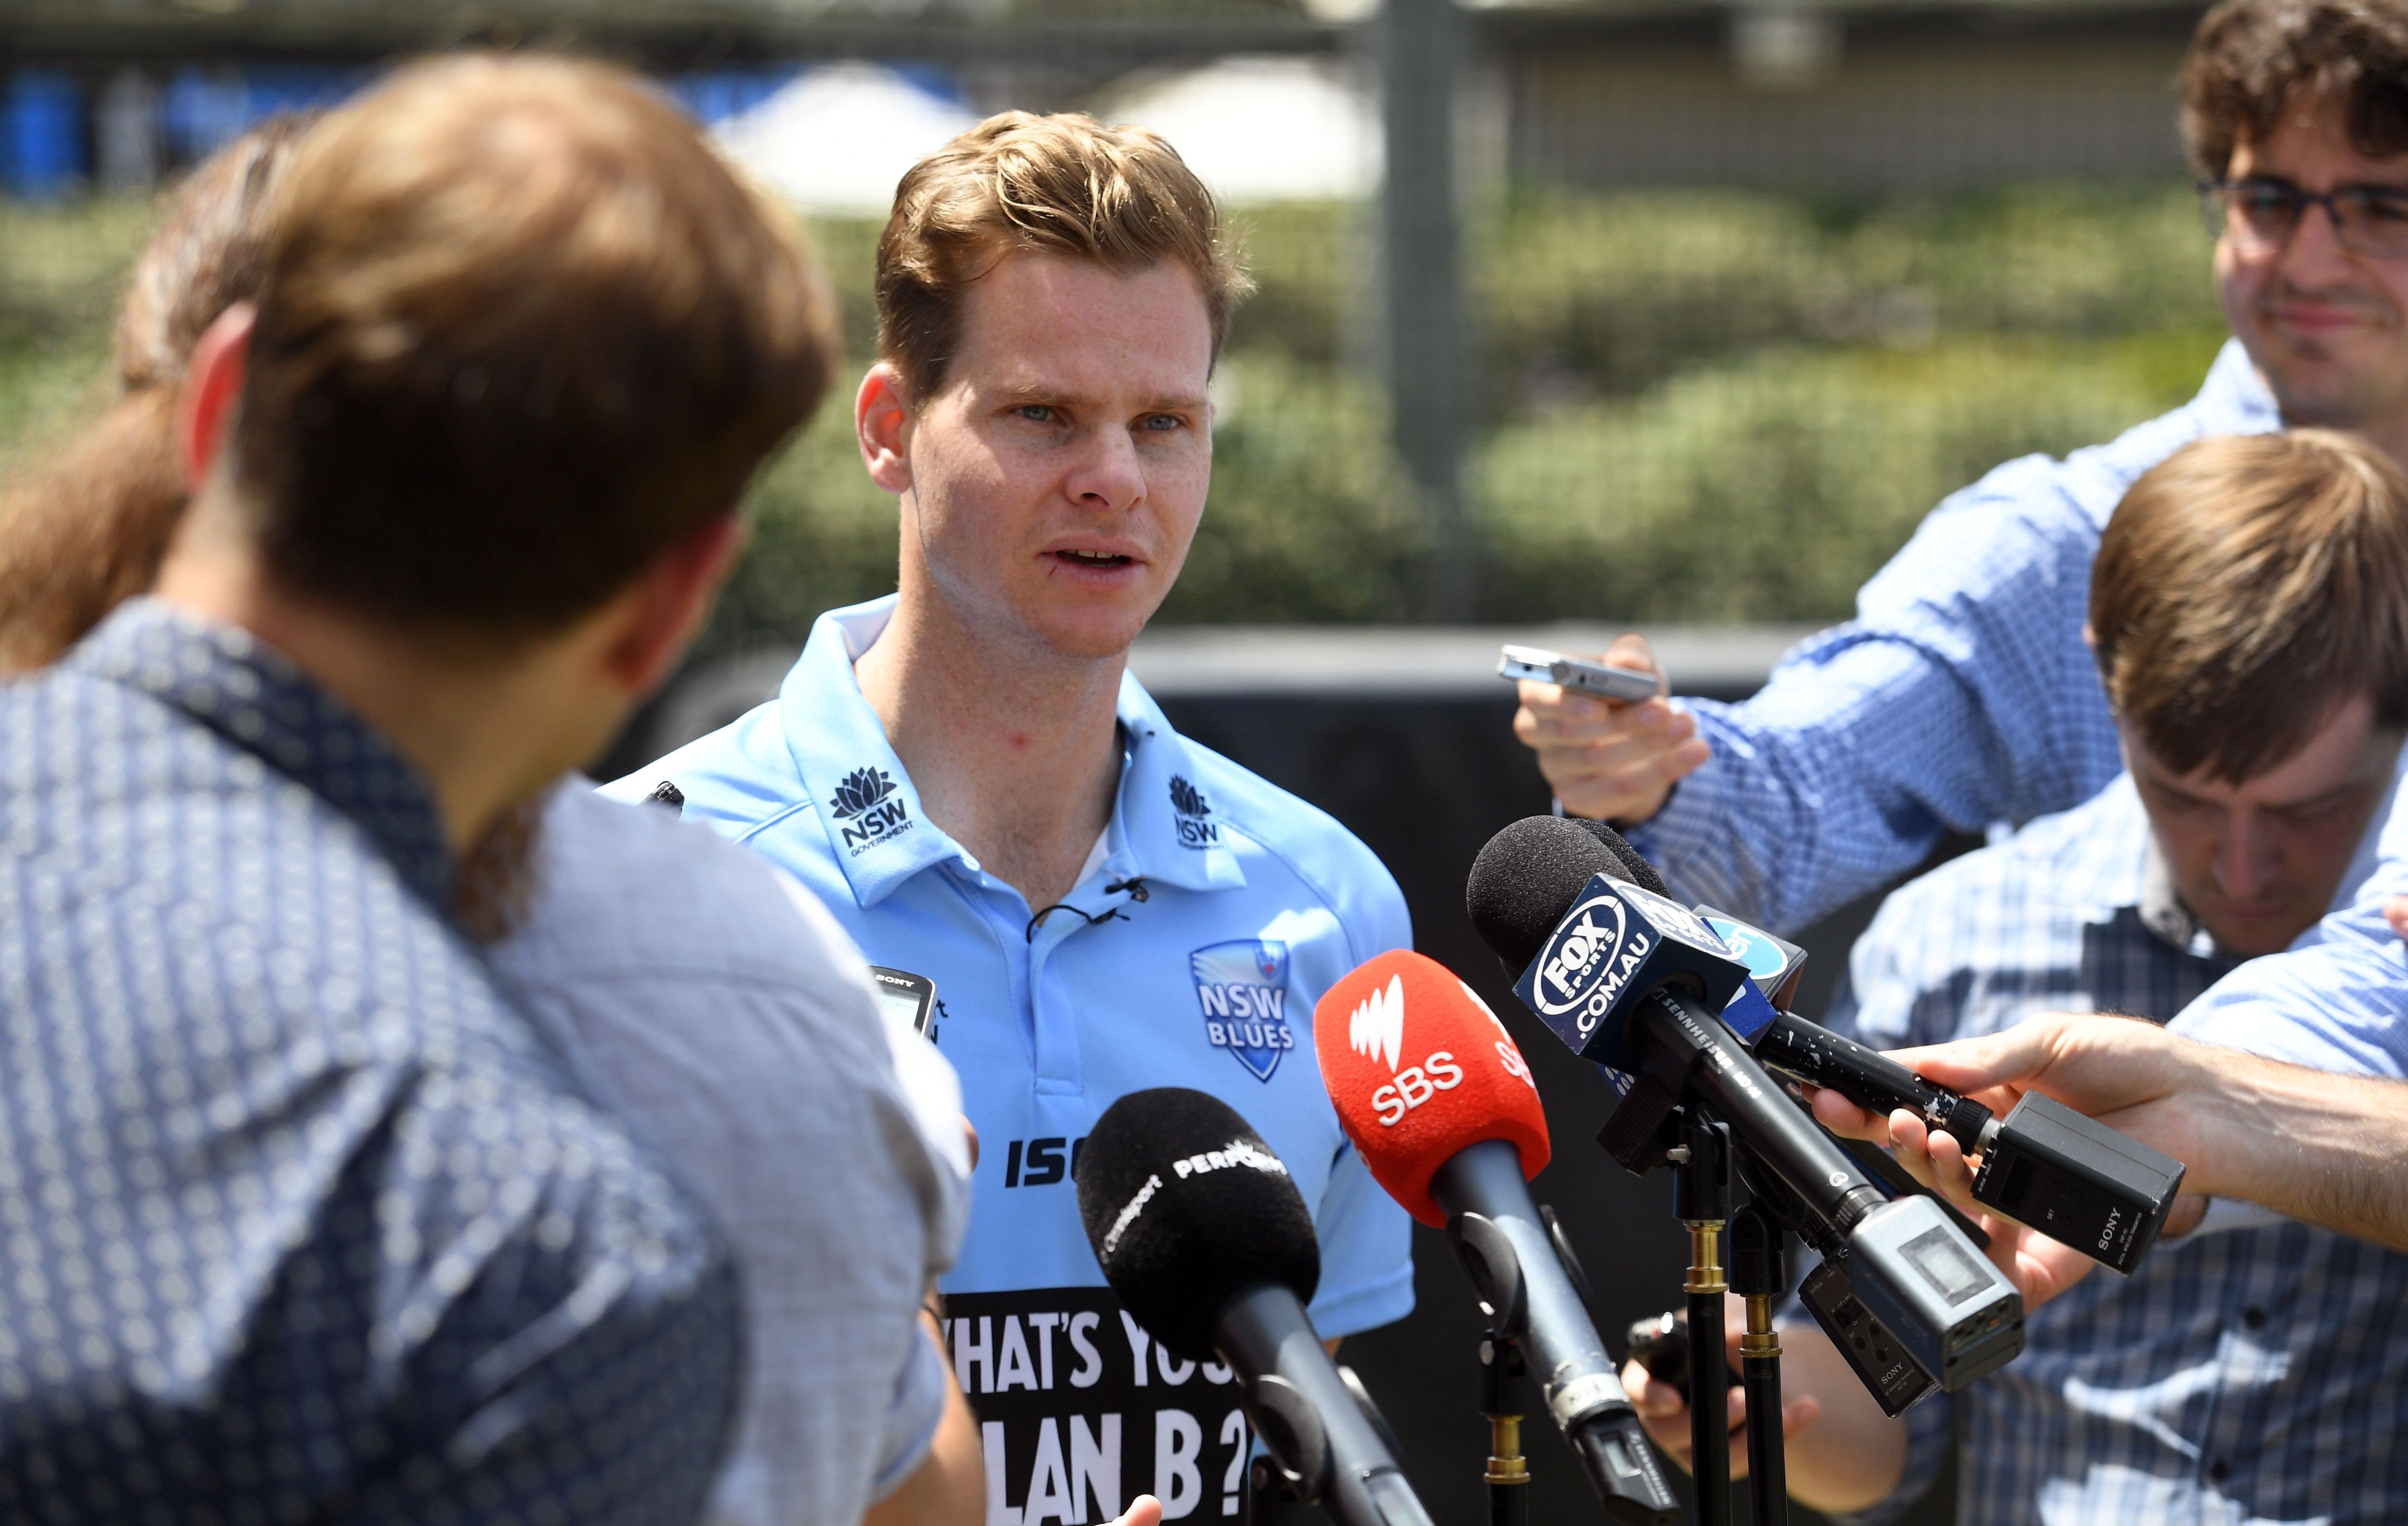 Australian captain Steve Smith has been criticised for perceived favouritism. Photo: AFP